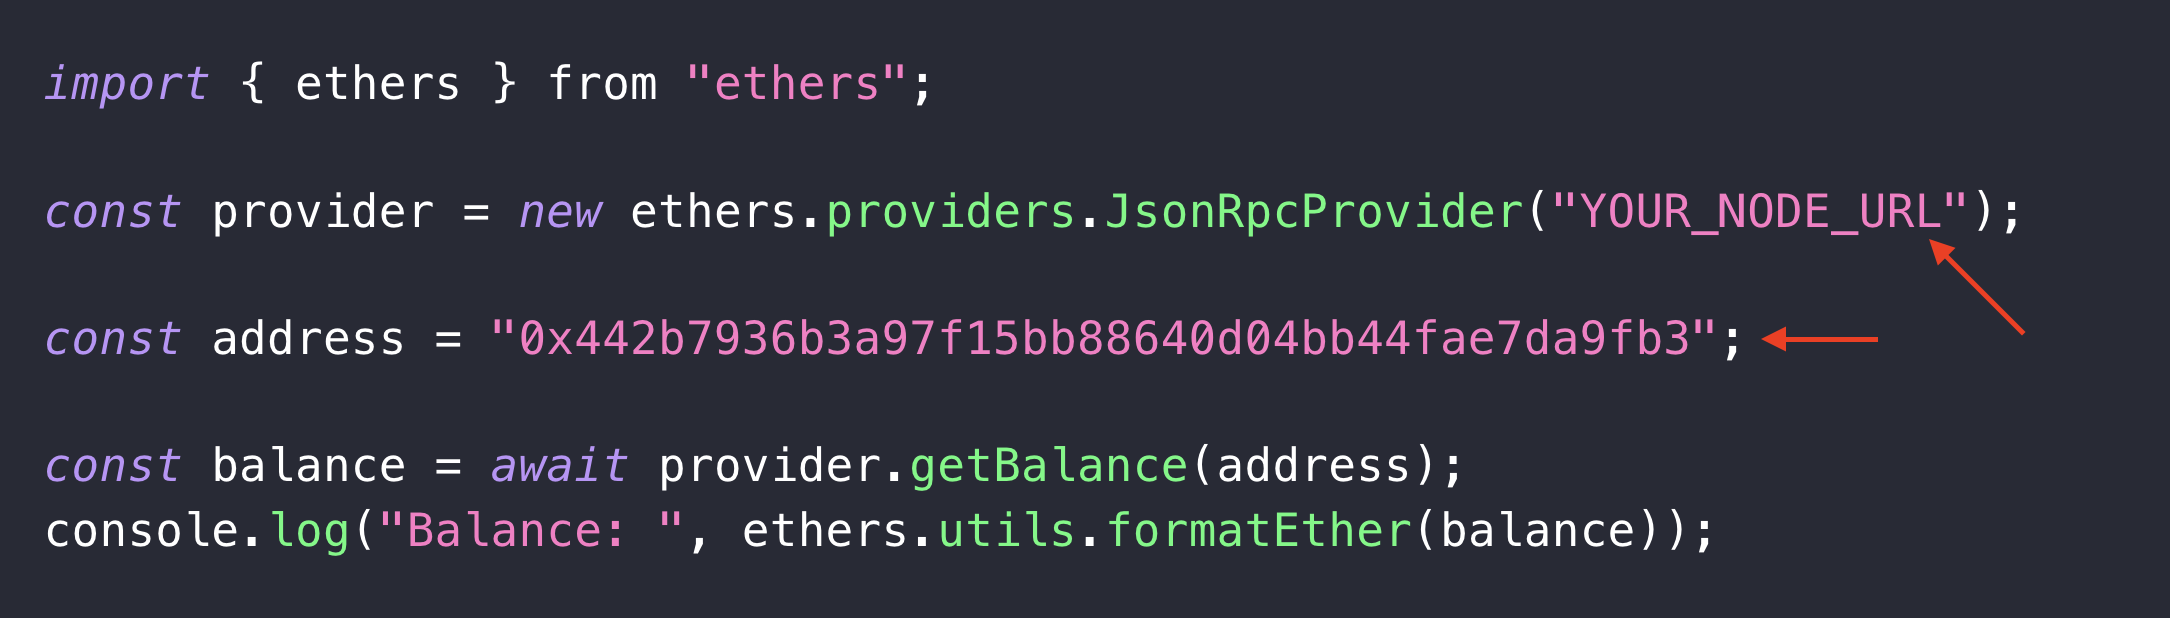 Red arrows pointing at "YOUR_NODE_URL" and "address" parameters in a code editor.